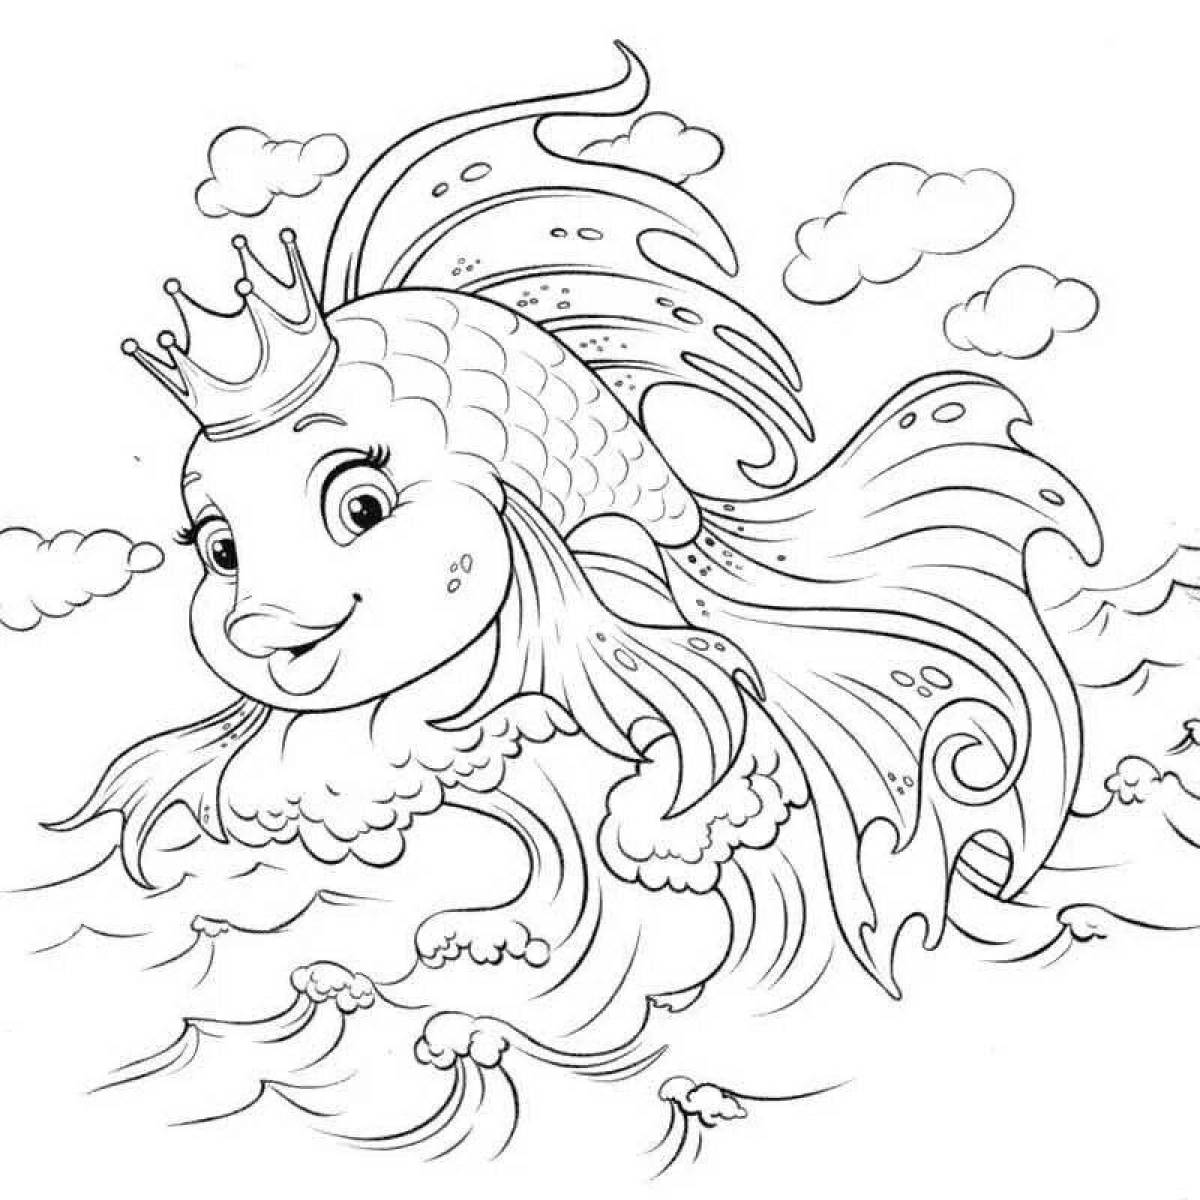 Colorful goldfish story coloring page